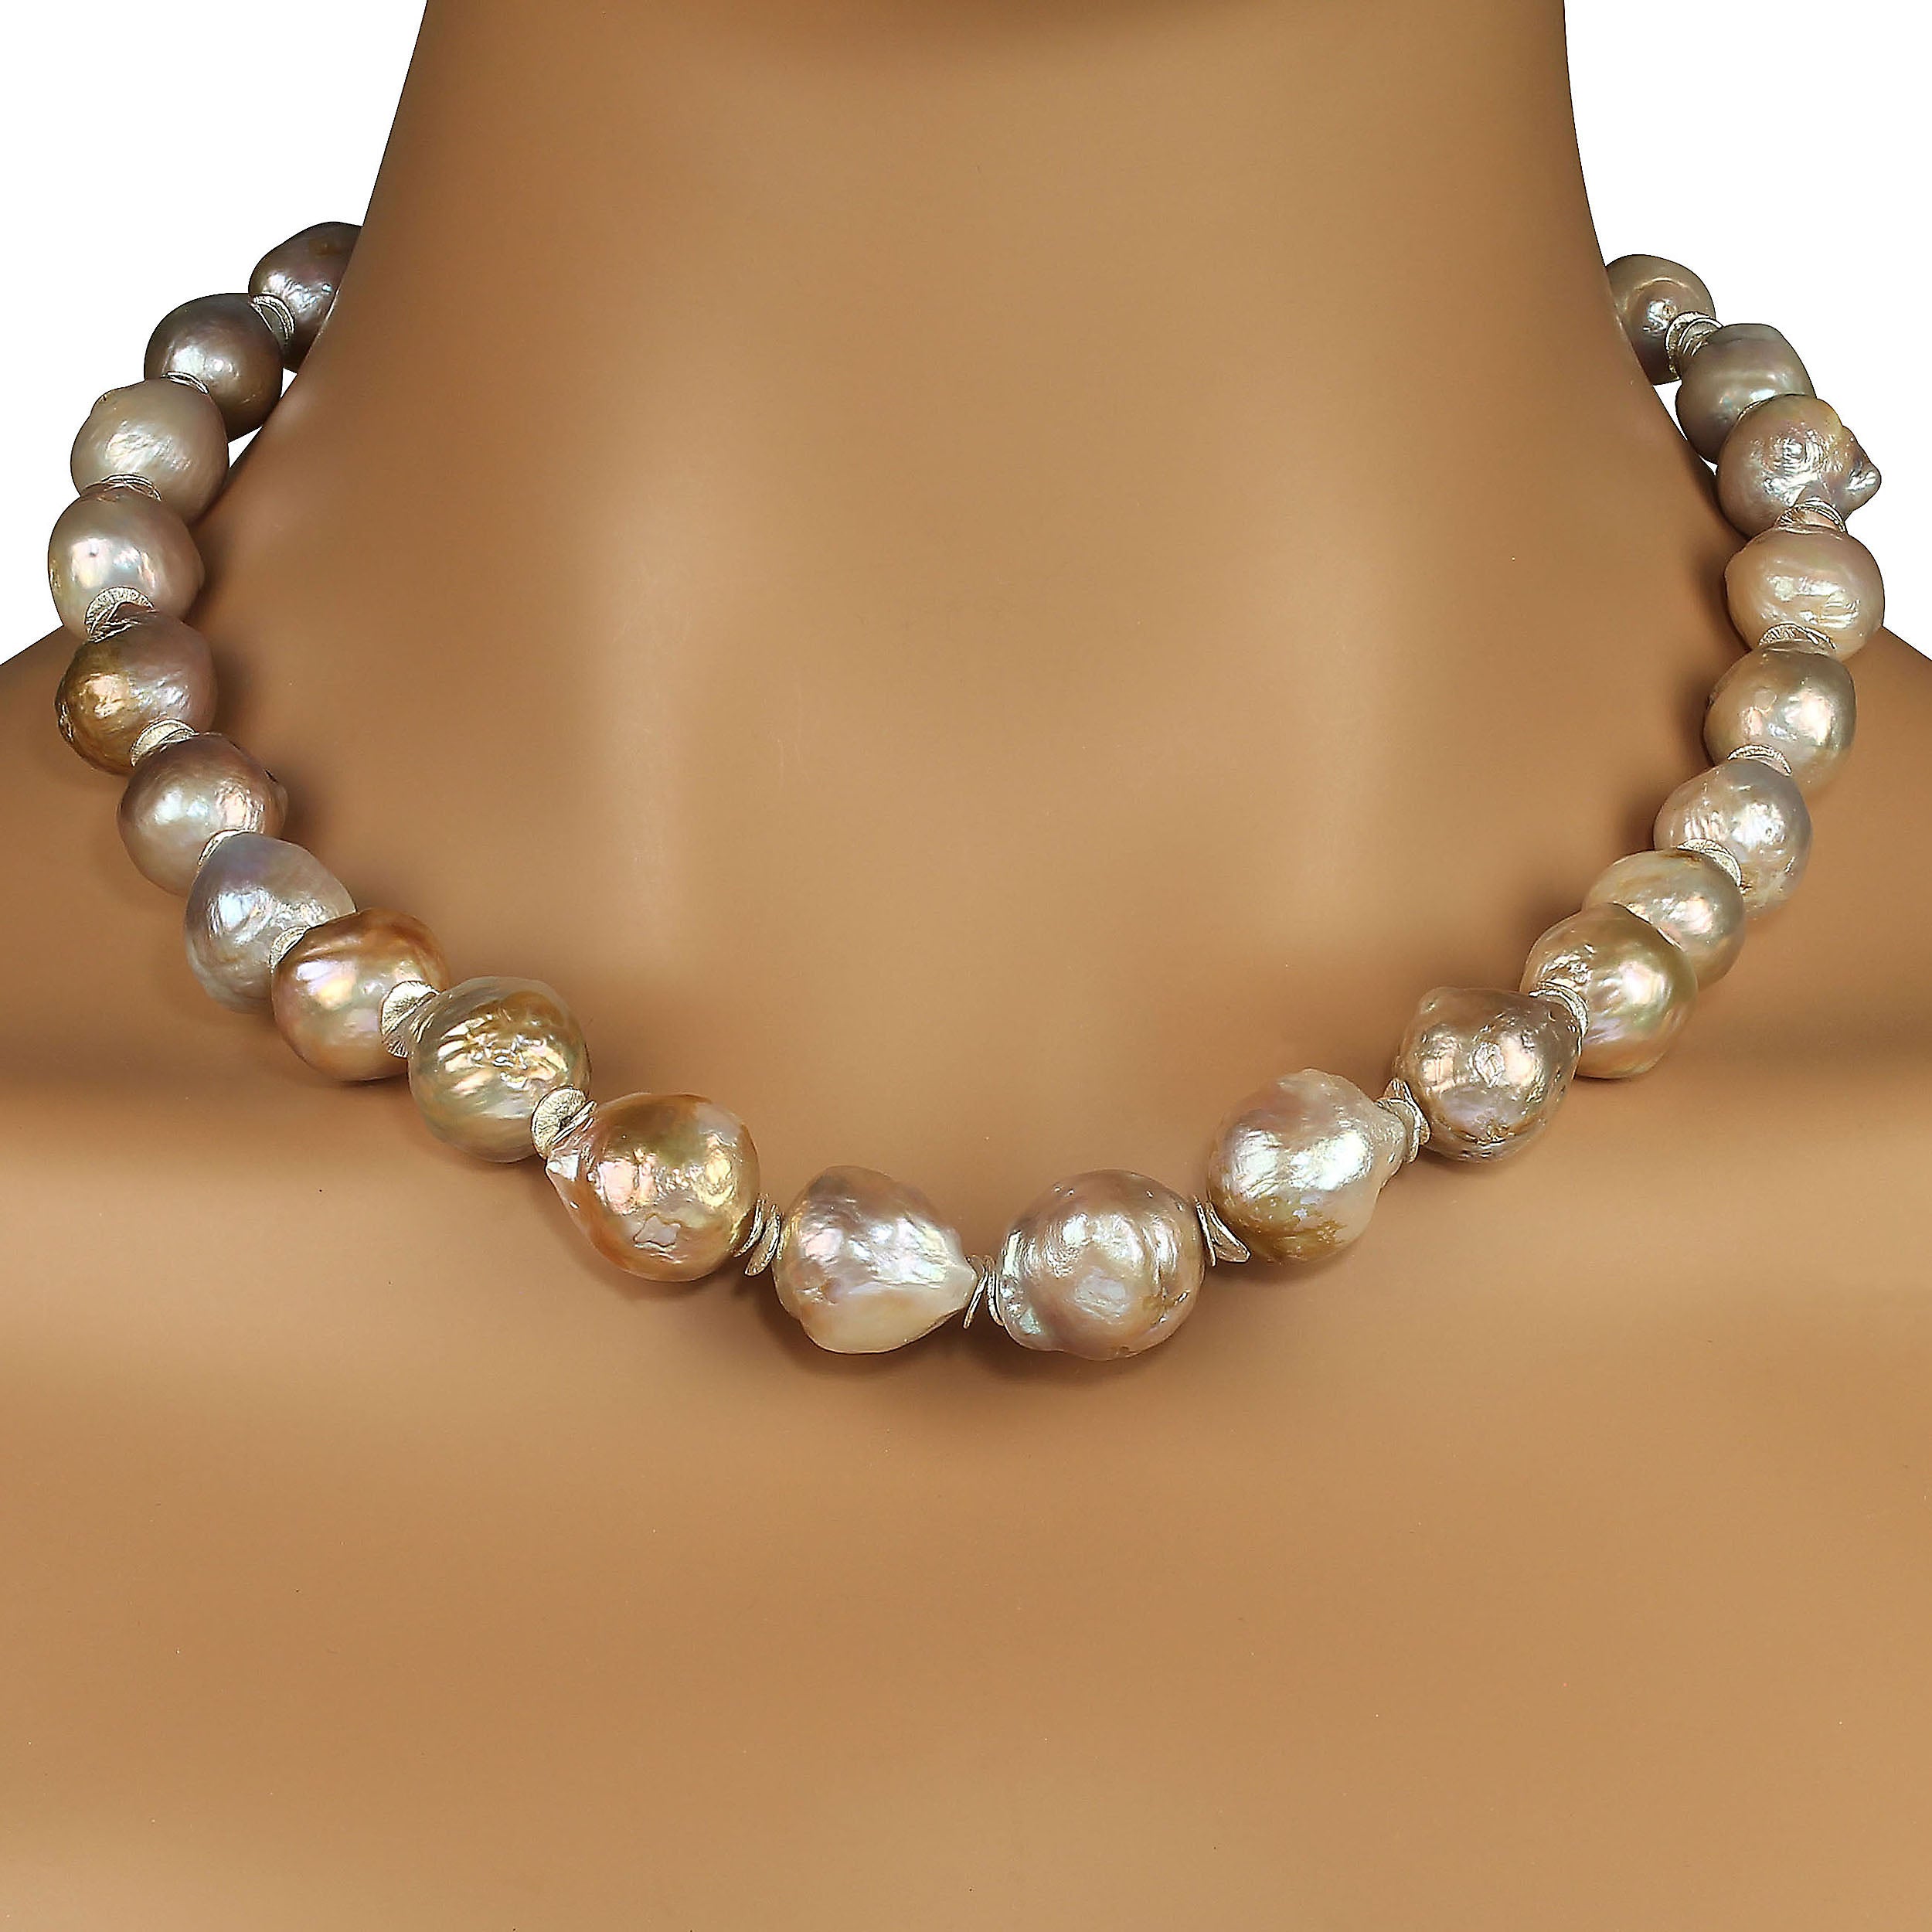 AJD 19 Inch Baroque Iridescent Silvery Pearls with silvery accents Perfect Gift! For Sale